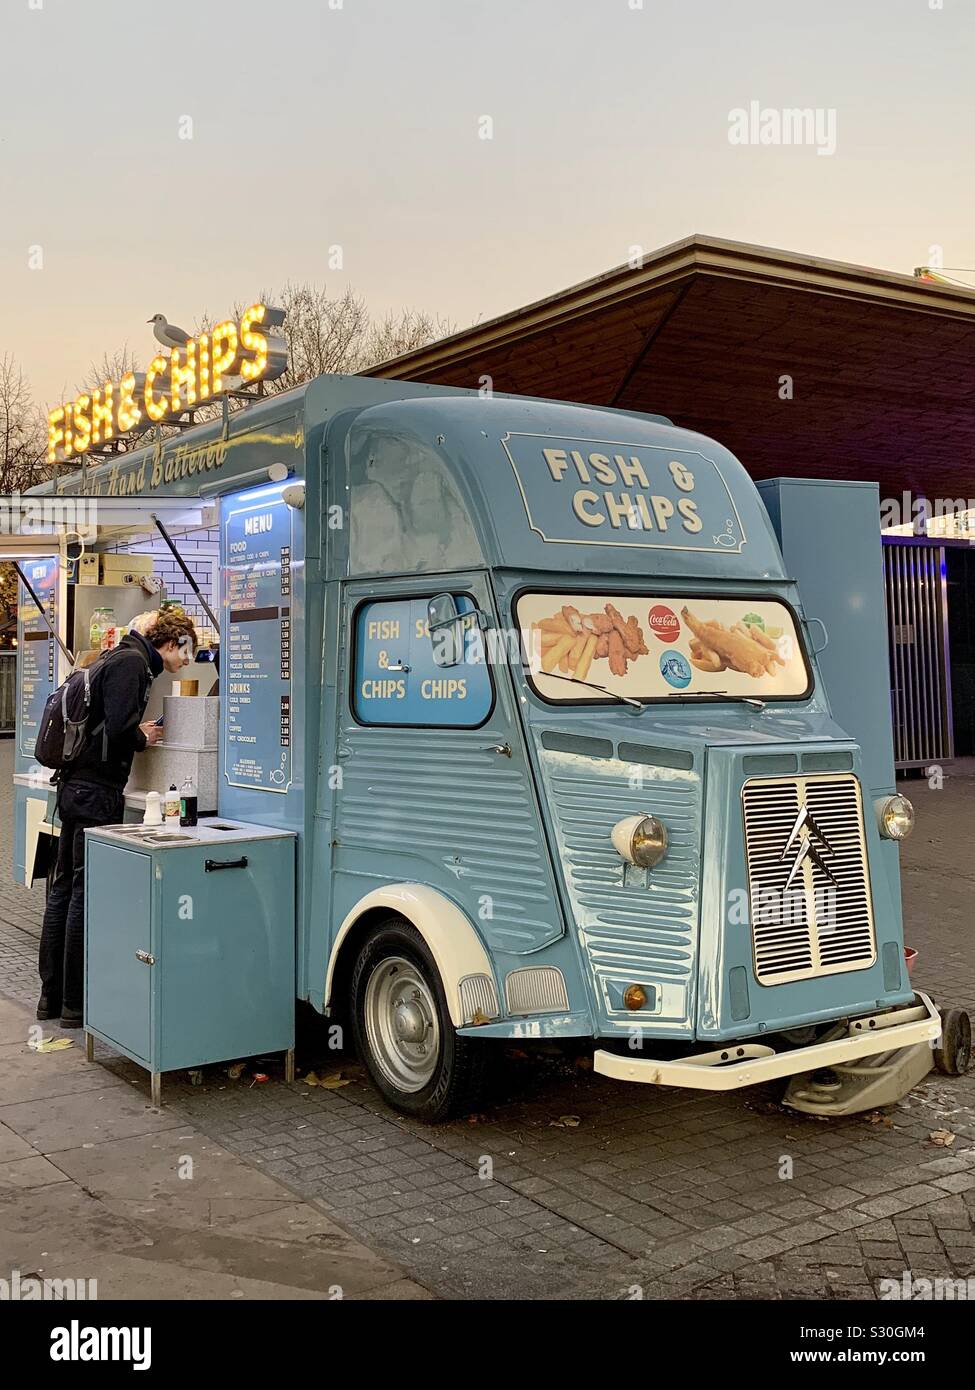 London, UK - 2 December 2019: Fish and chips sold from a pale blue vintage Citroen van. Southbank, Central London. Stock Photo